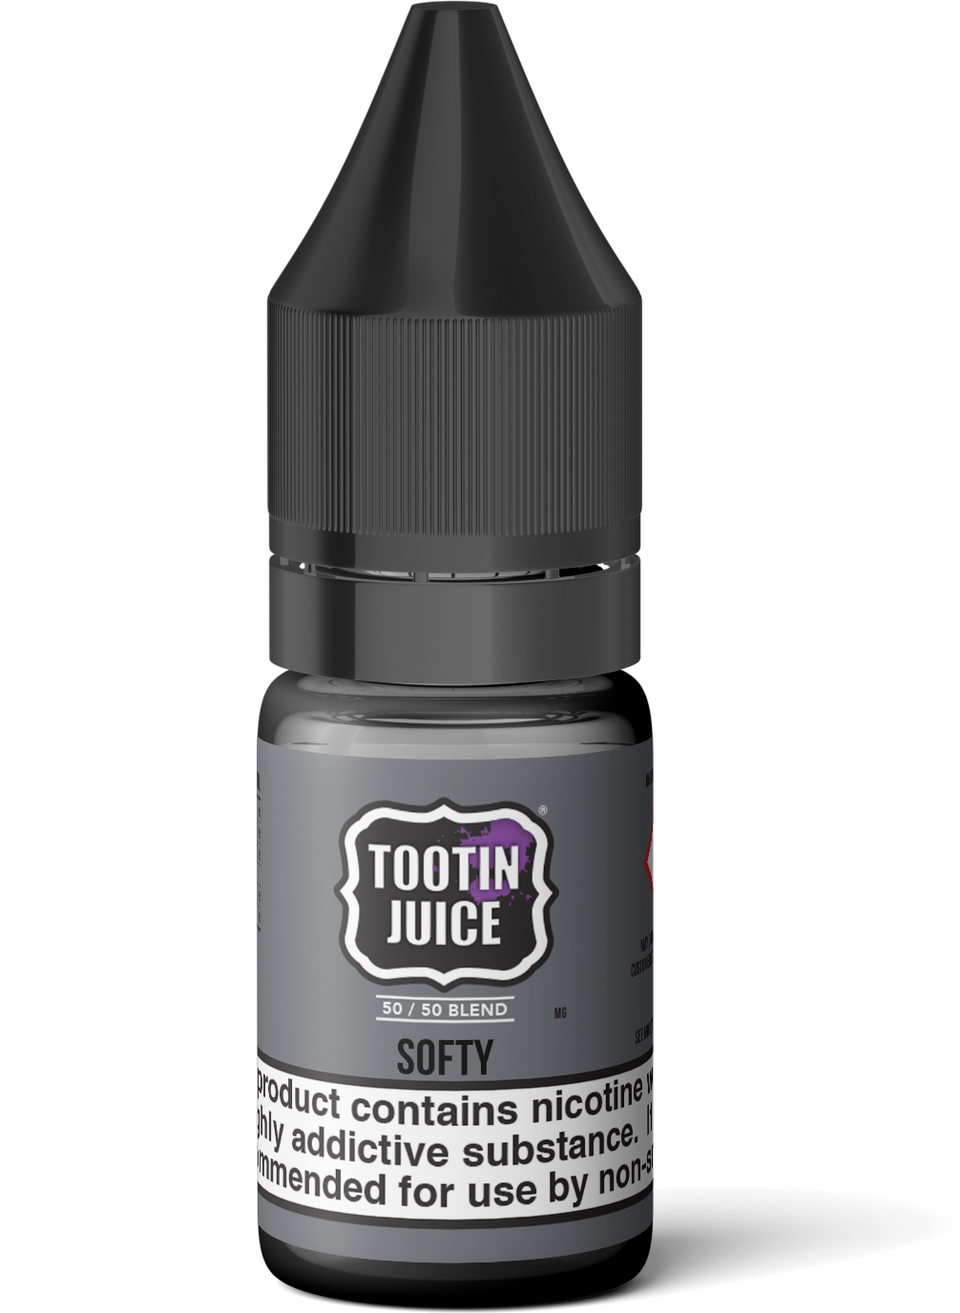 Softy Tootin Juice (formerly known as Spearmint) - ASPIRE UK